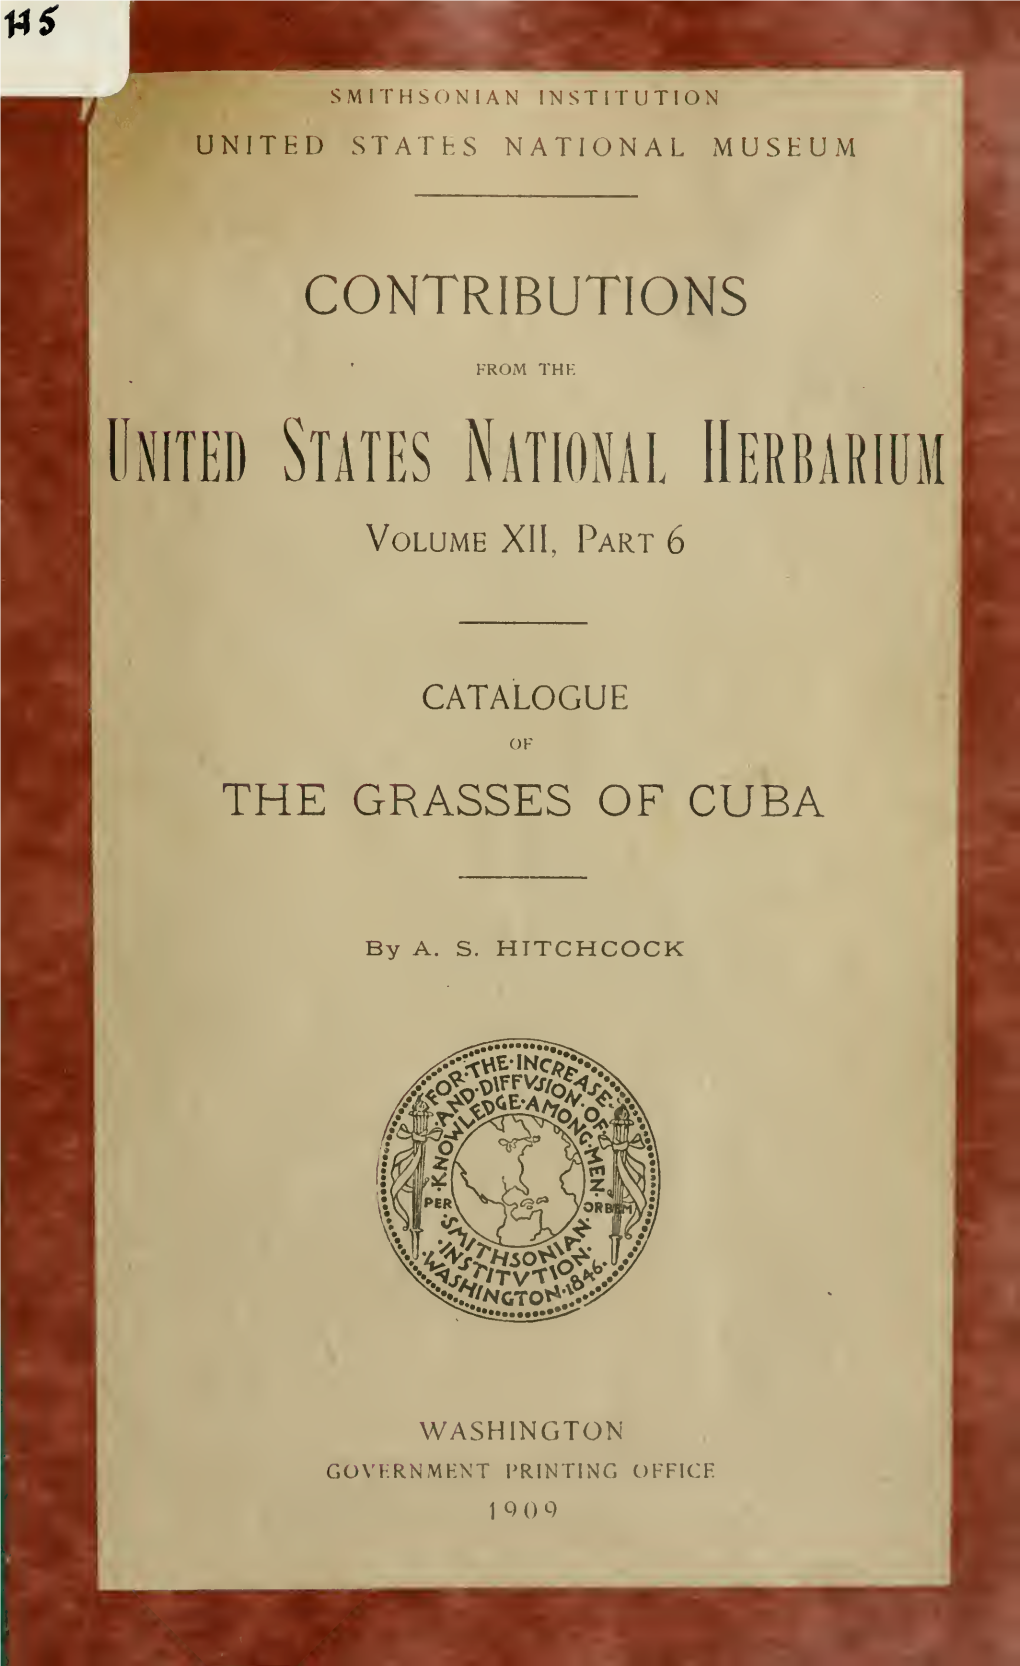 Catalogue of the Grasses of Cuba